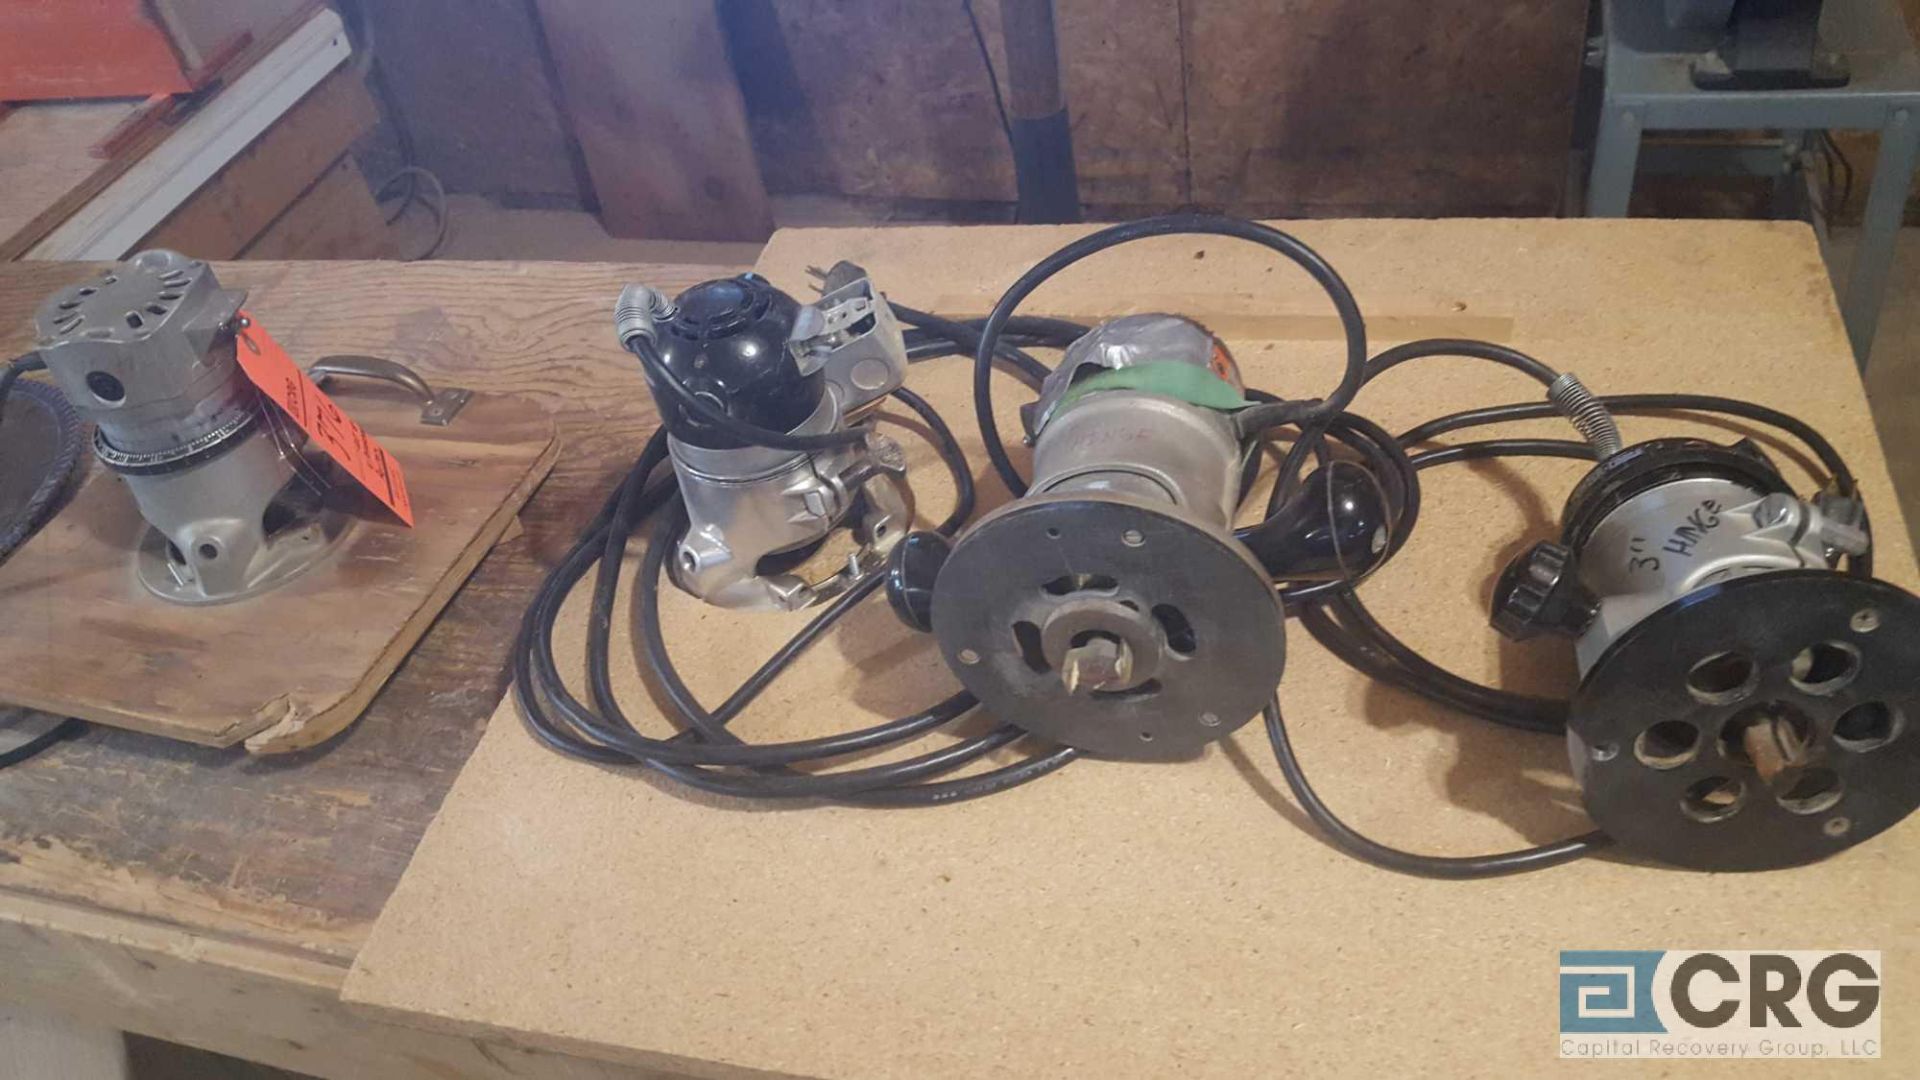 Lot of (4) assorted electric power tools, including (1) Porter Cable 3315 router with model 1001